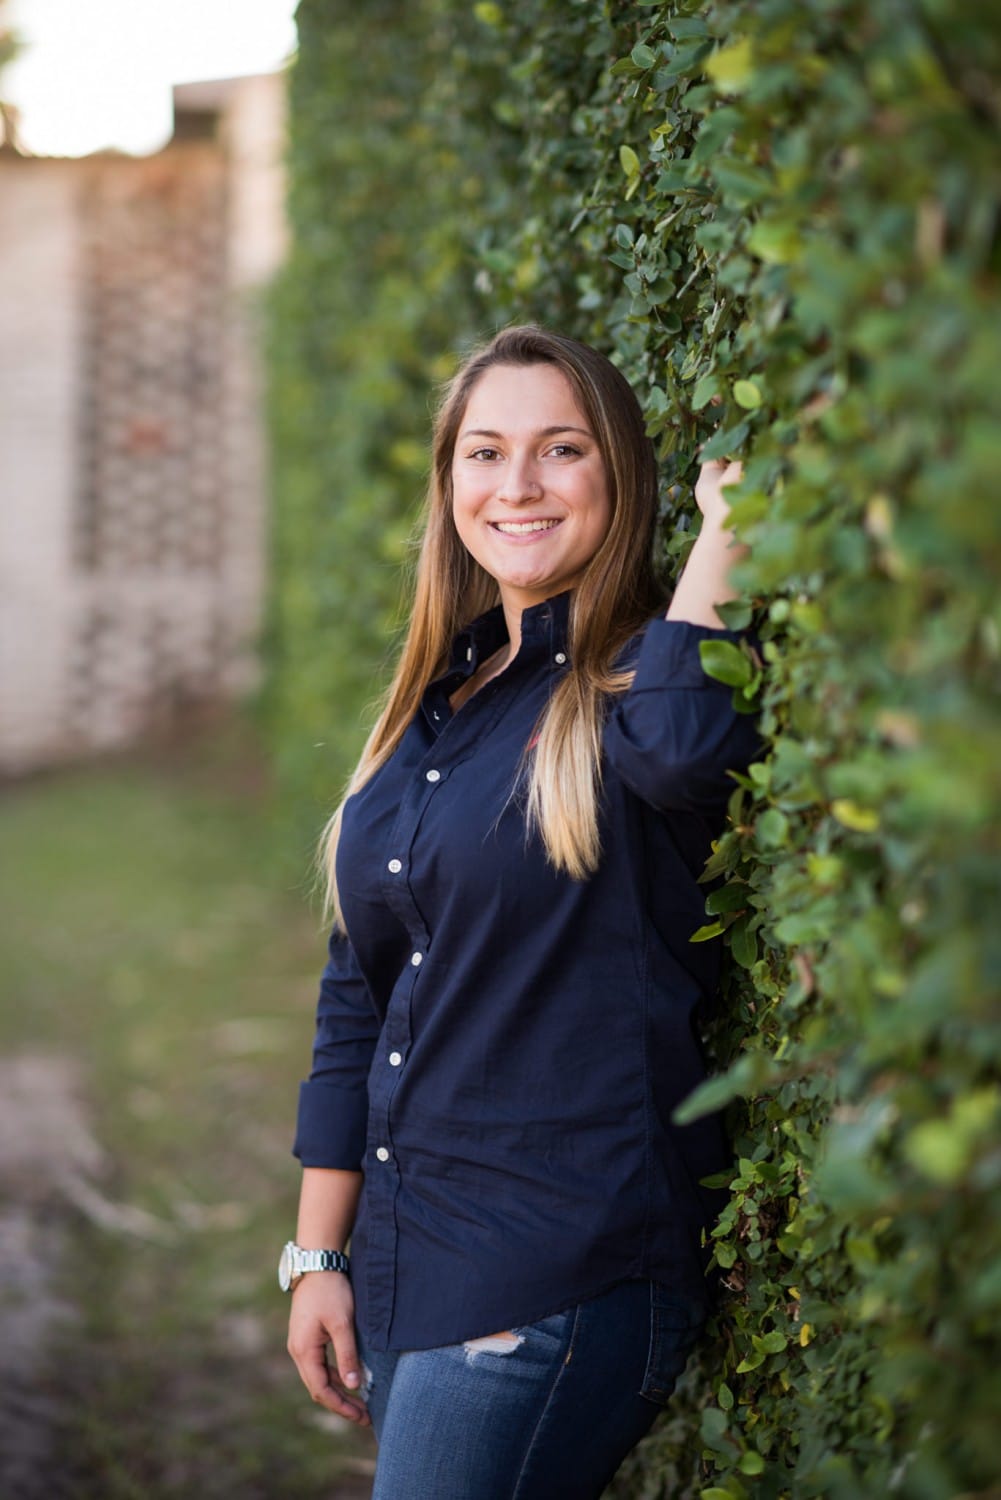 Senior portrait by the ivy covered wall - Atalaya Castle